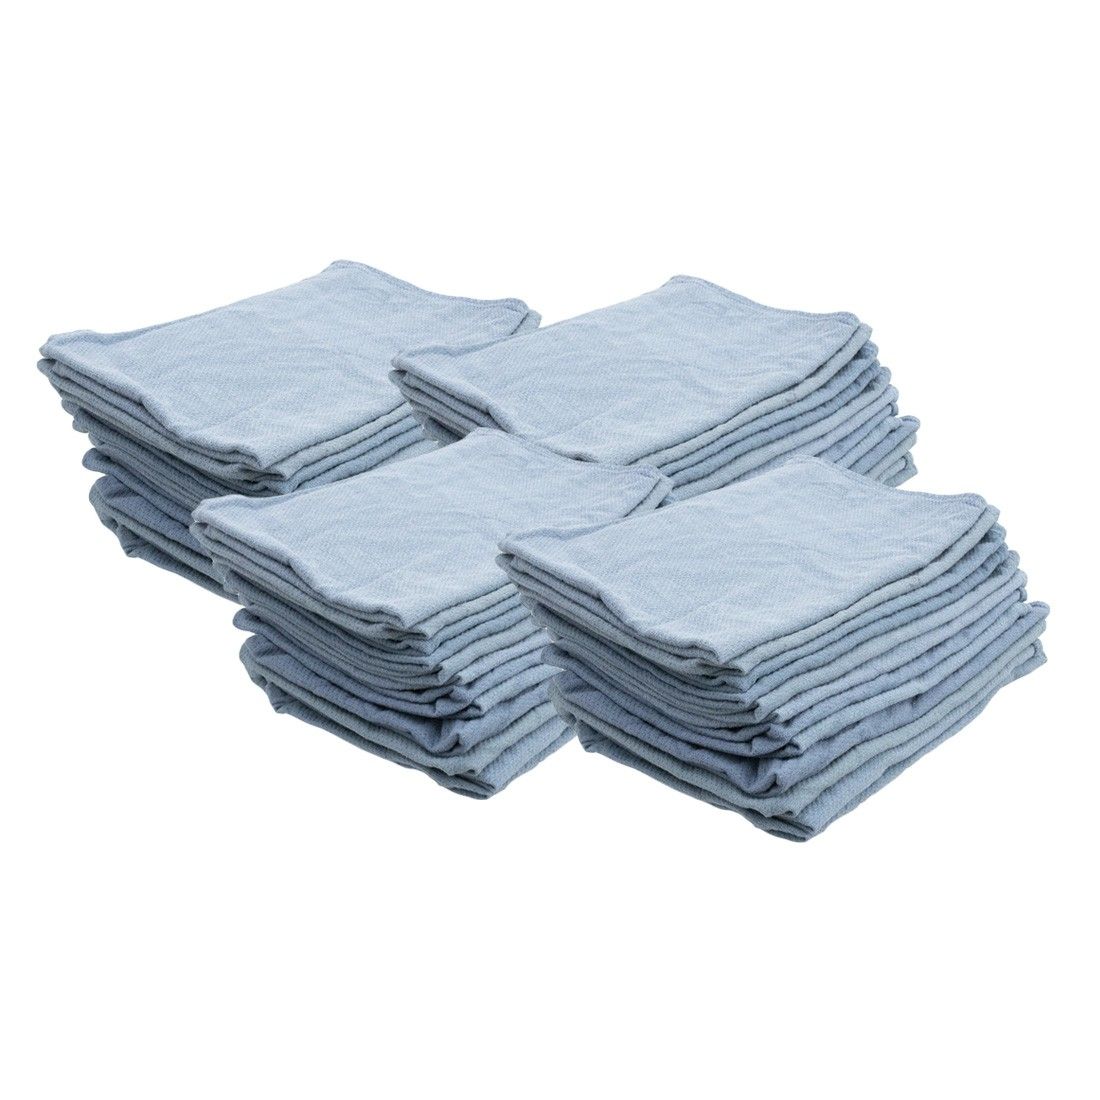 Ultra Premium Recycled Surgical Towels - Jumbo - 48 Pack - Stacked View